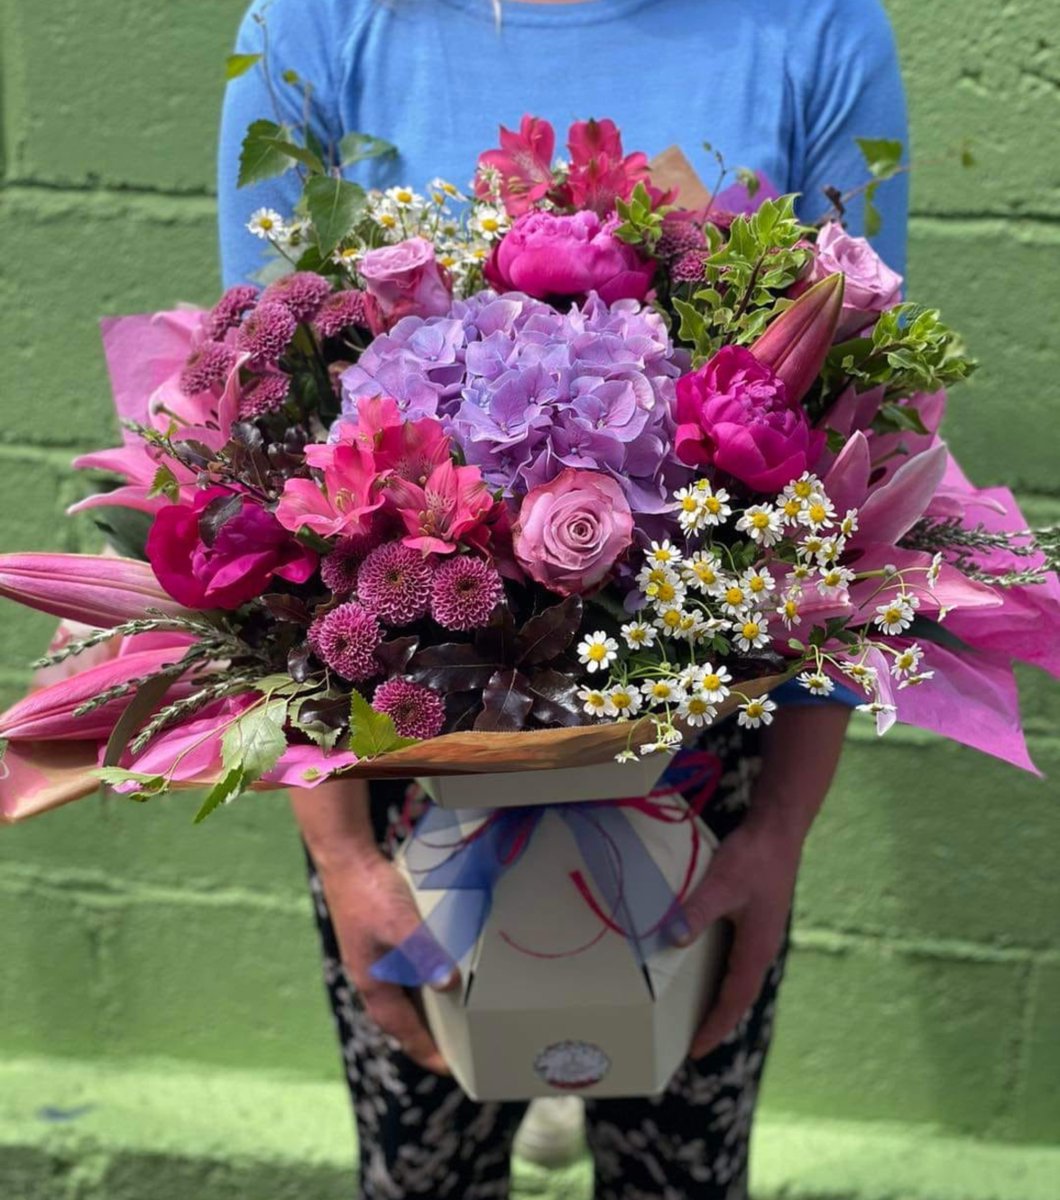 Floral essence 
And weekend is here🎉☀️
#bouquet #flowerdelivery #floralessenceportlaoise #pinks #pretty #bouquetinabox #portlaoise #lovelaois #summerbouquet
👌 This is a #sponsored post, supporting business in our community 💕